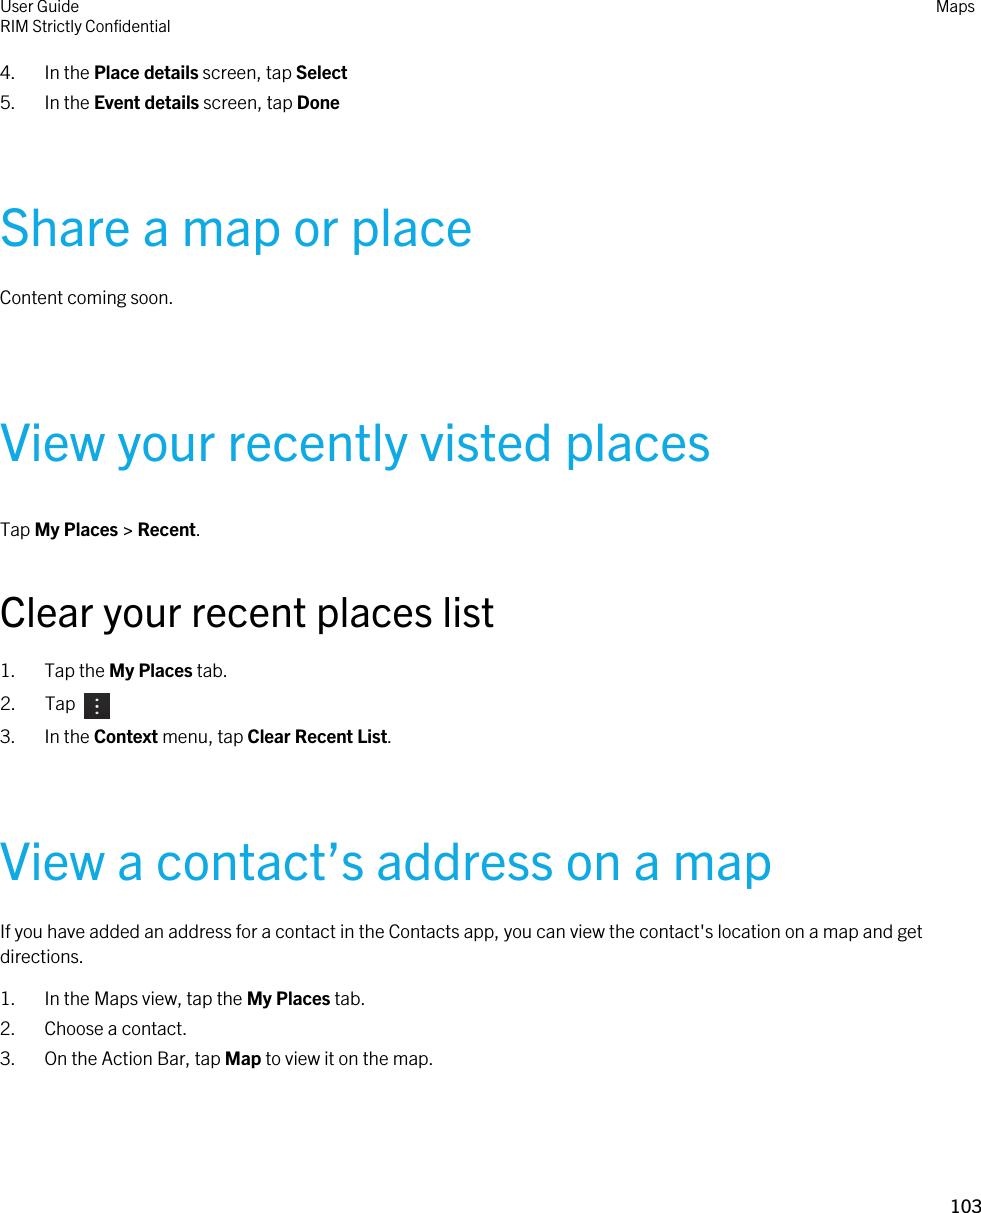 4. In the Place details screen, tap Select5. In the Event details screen, tap DoneShare a map or placeContent coming soon.View your recently visted placesTap My Places &gt; Recent.Clear your recent places list1. Tap the My Places tab.2.  Tap 3. In the Context menu, tap Clear Recent List.View a contact’s address on a mapIf you have added an address for a contact in the Contacts app, you can view the contact&apos;s location on a map and get directions.1. In the Maps view, tap the My Places tab.2. Choose a contact.3. On the Action Bar, tap Map to view it on the map.User GuideRIM Strictly ConfidentialMaps103 